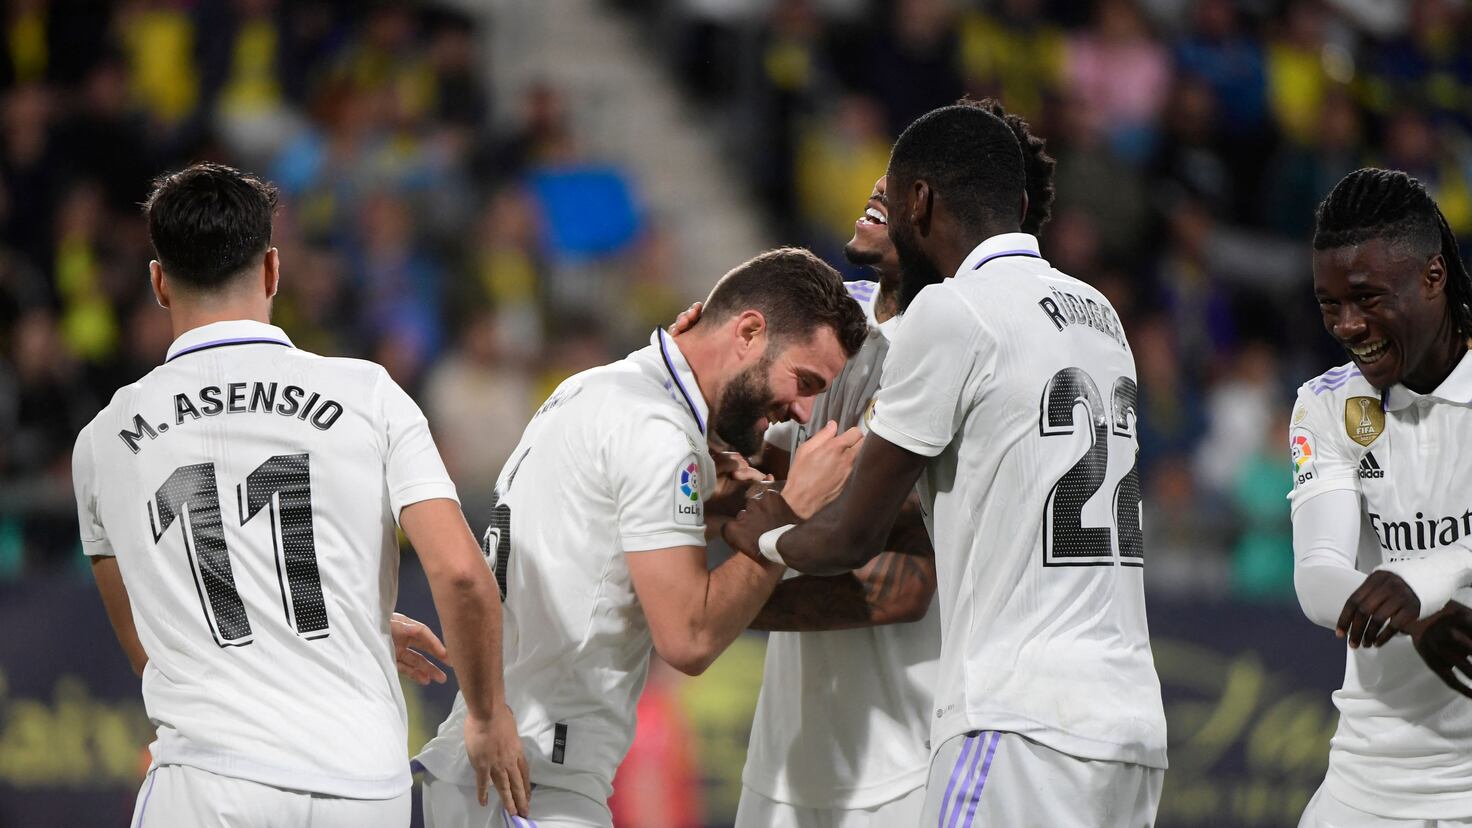 Real Madrid-Cádiz is striving to win to move us closer to the league title. - Analysis of the match result and impact on the league title race